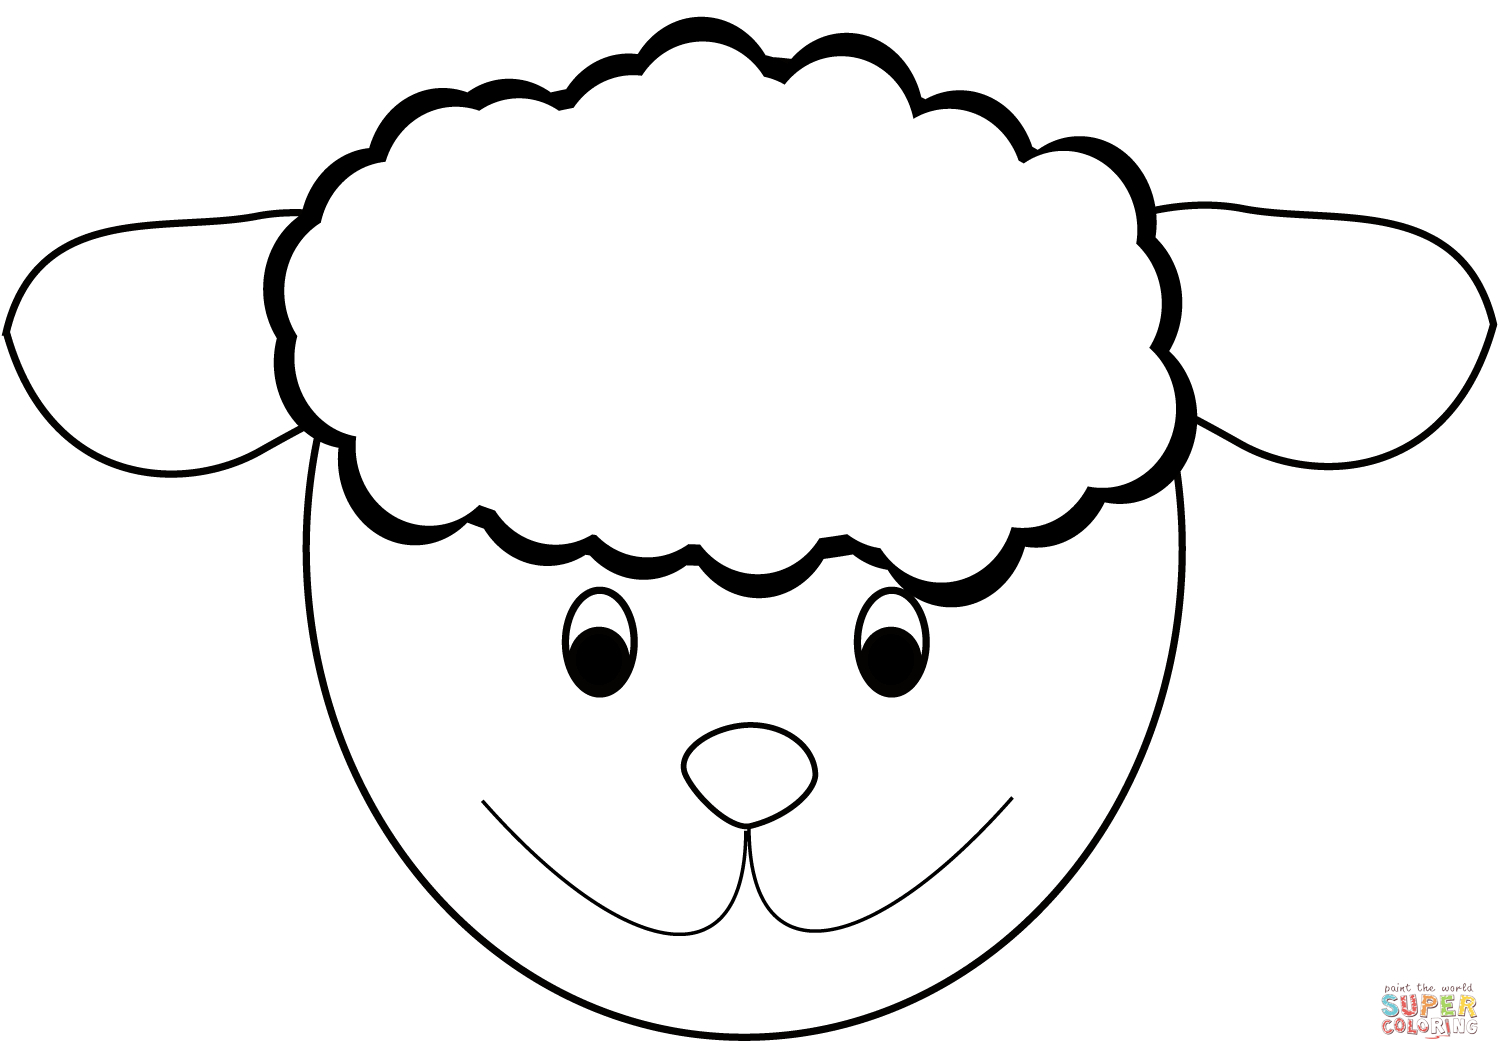 Sheep Face Coloring Page Sheep Head Coloring Page Free Printable Coloring Pages